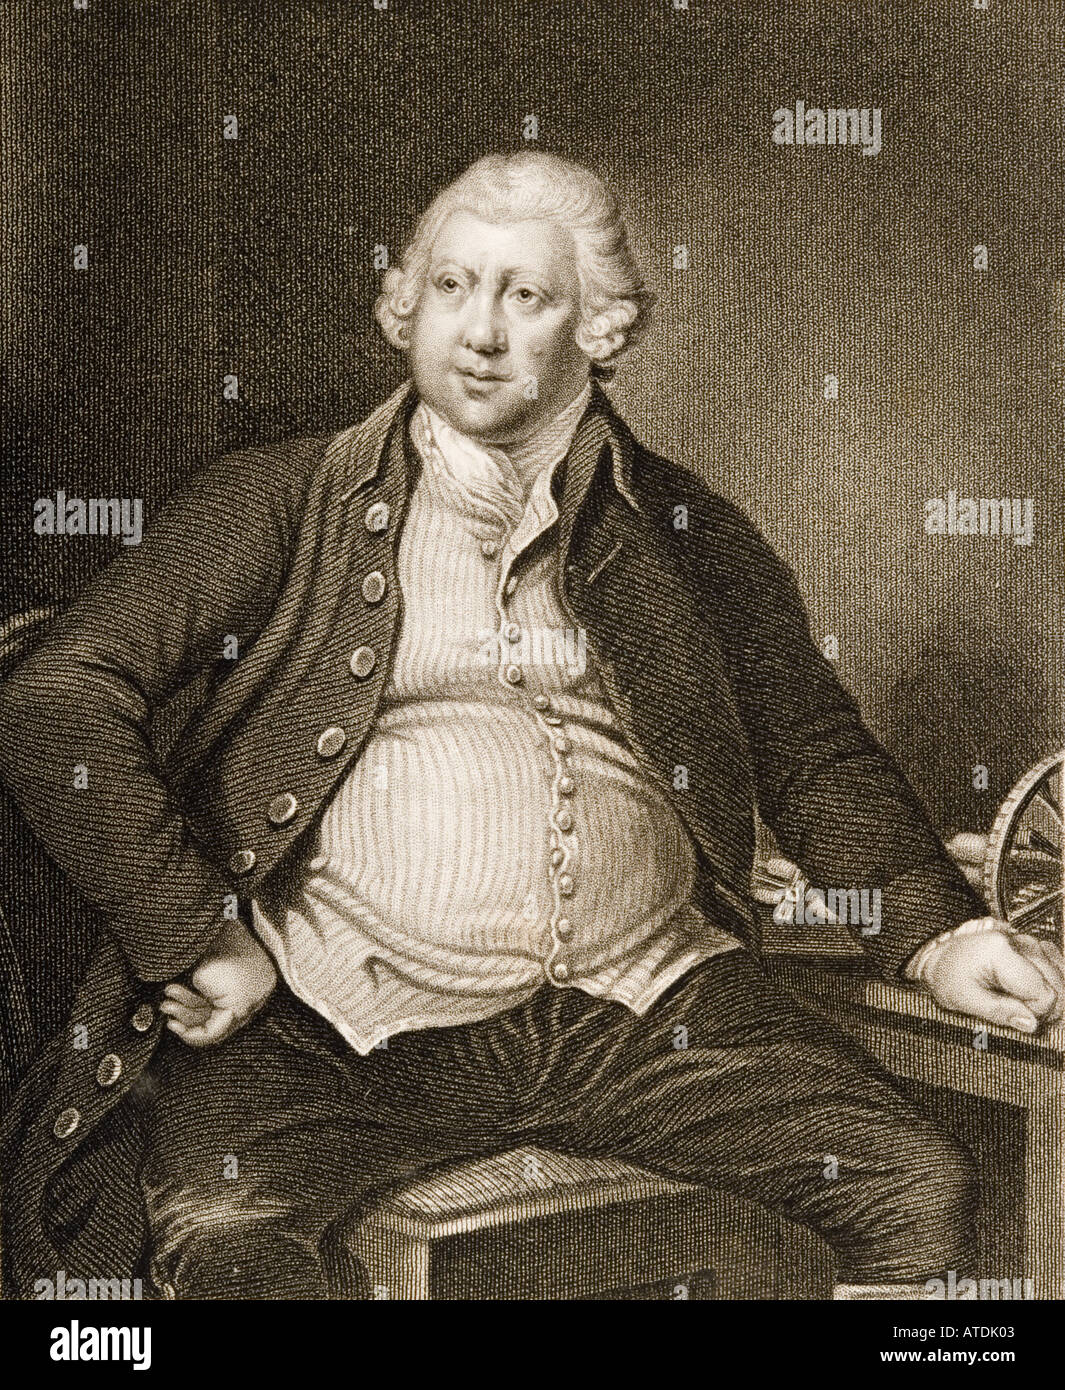 Sir Richard Arkwright, 1732 - 1792. Inglese industriale tessile e inventore. Foto Stock